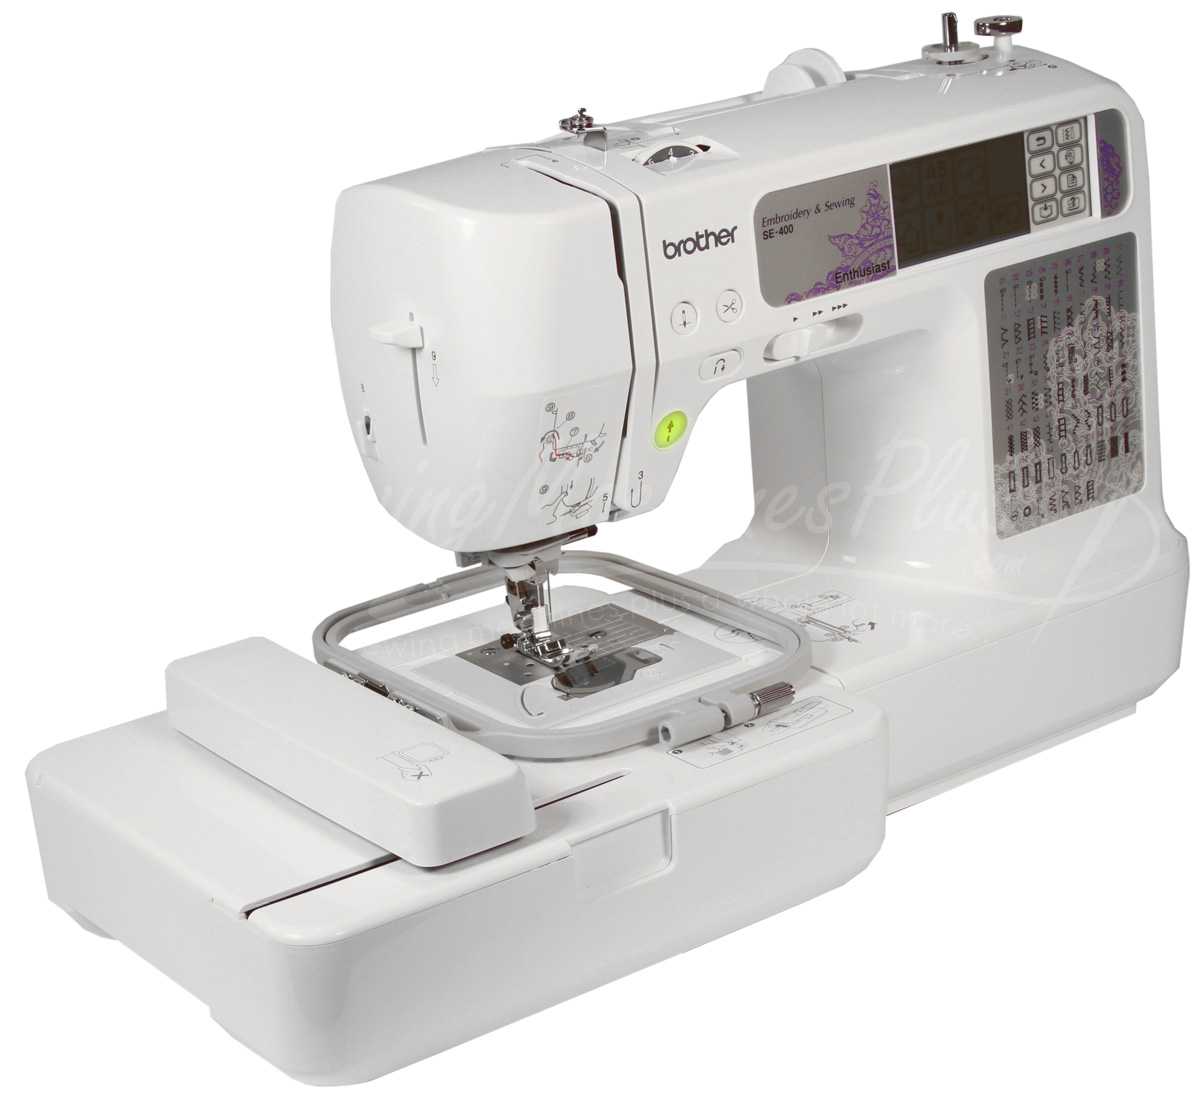 Brother SE400 FS Sewing Embroidery Machine with Computer Connectivity